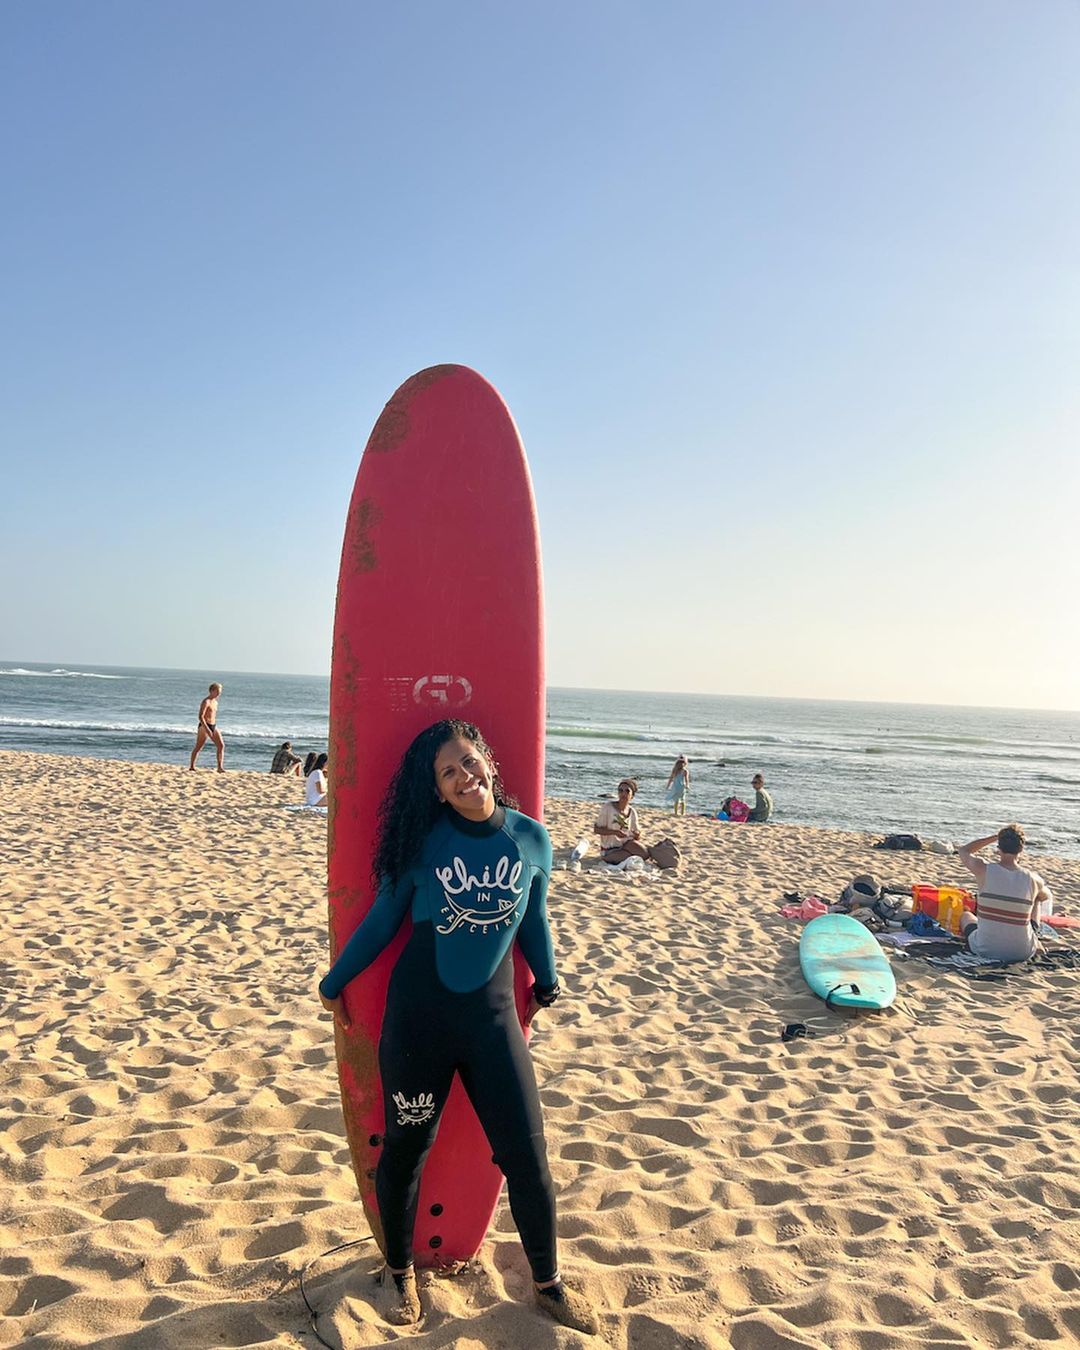 Trip leader Christina Patel holding her surfboard on the beach of Taghazout.